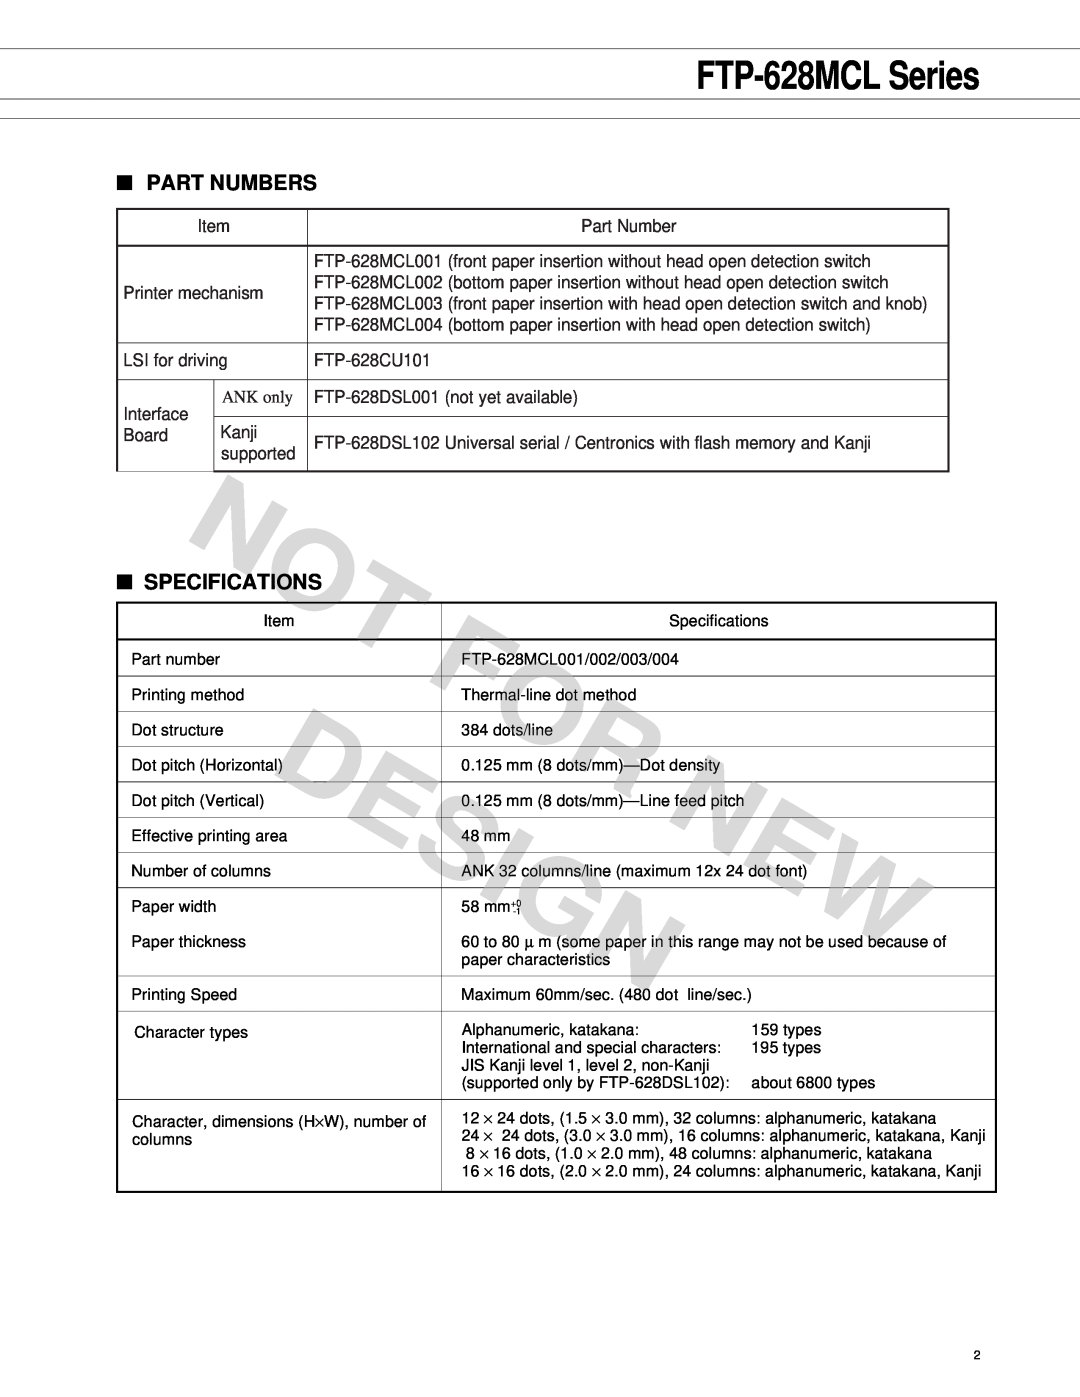 Fujitsu FTP-628 Series manual FTP-628MCL Series, Part Numbers, Specifications, Design 